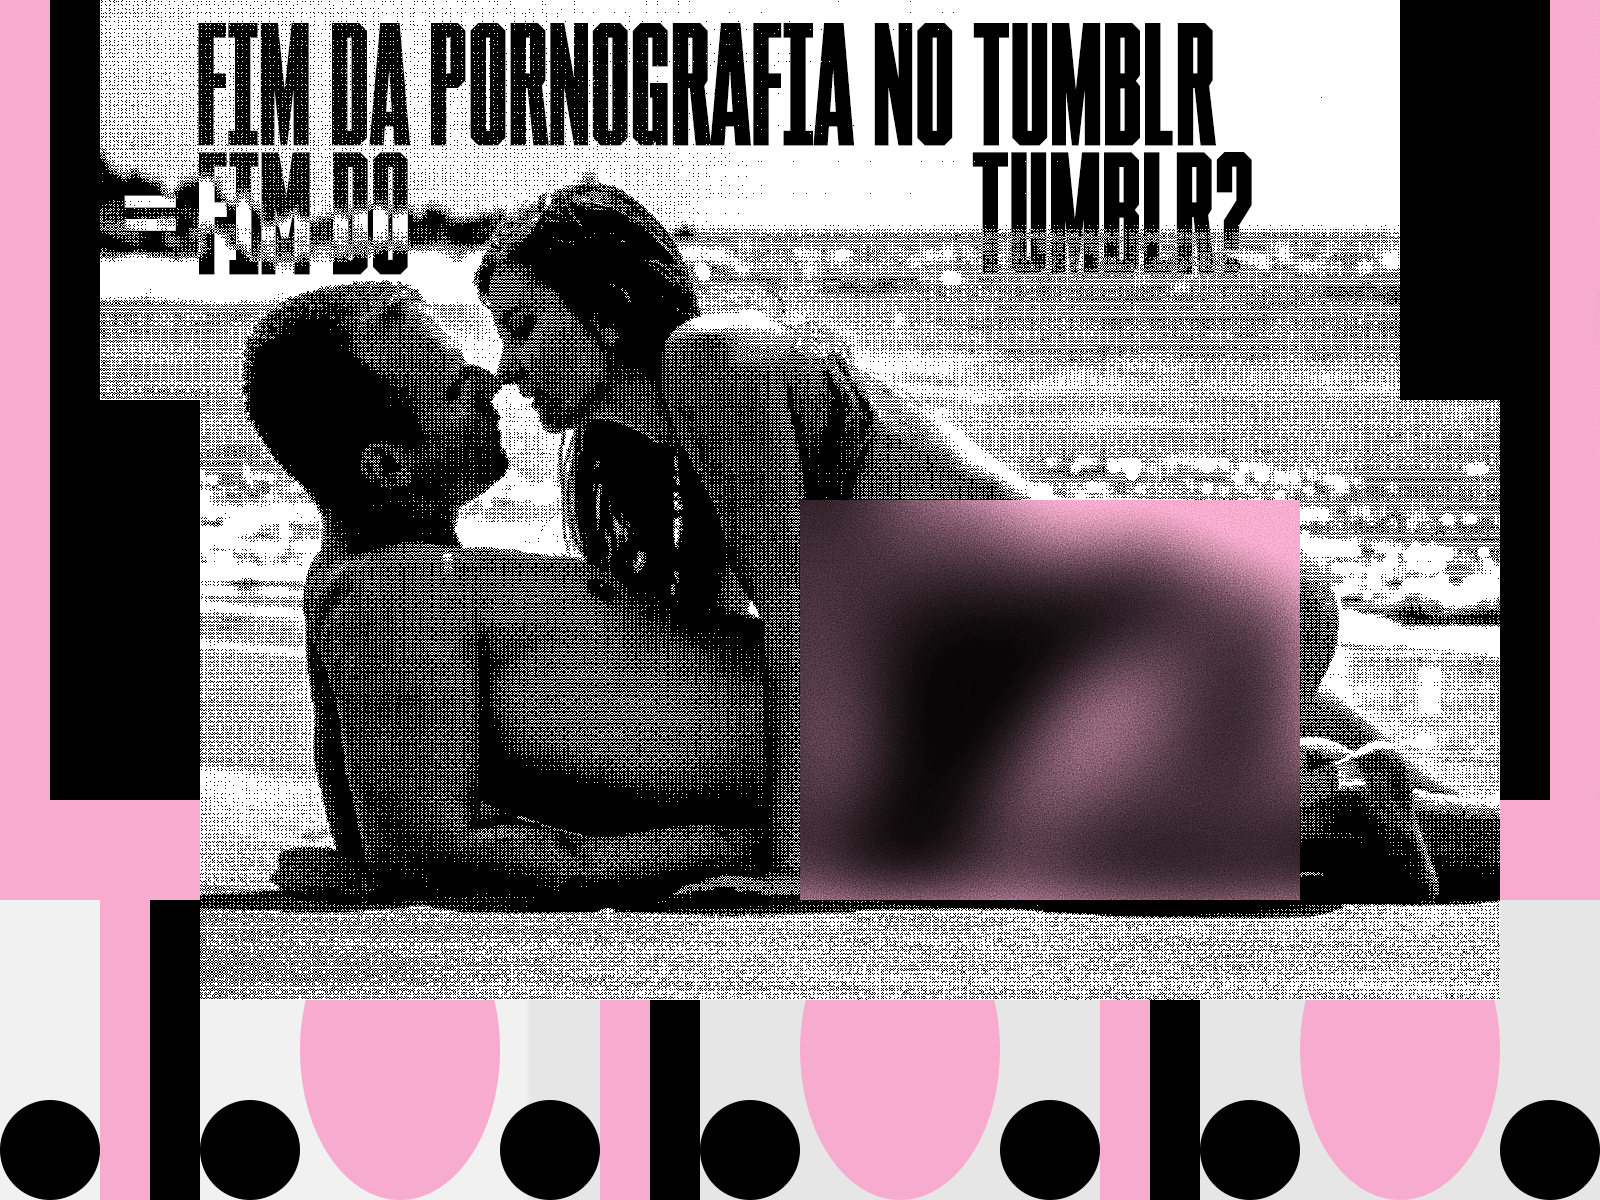 exploration.2018.12.06-B black and white caps collage dither editorial illustration glitch illustration lo-fi porn sex type typography